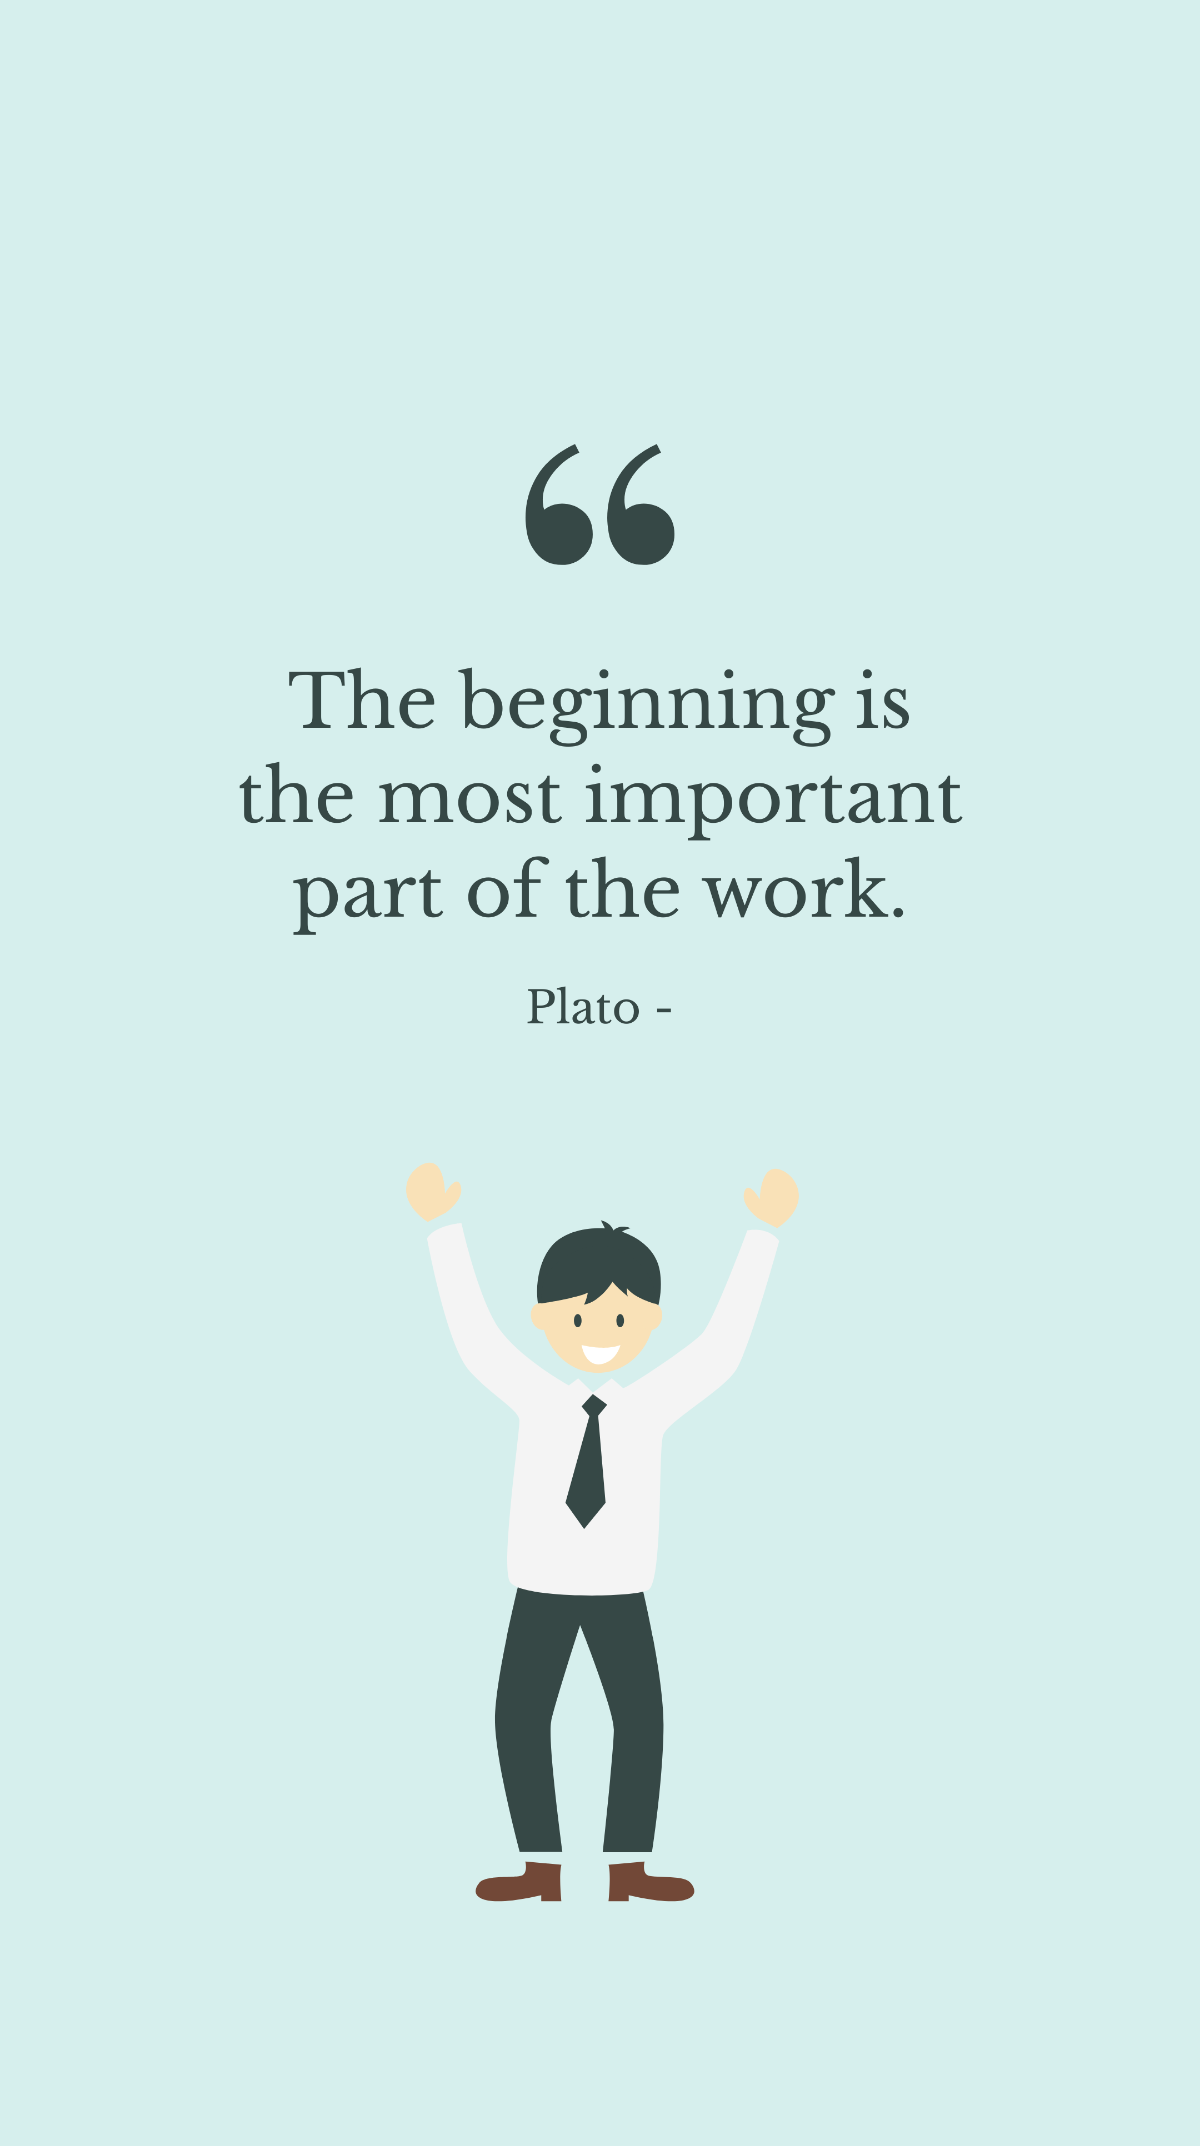 Plato - The beginning is the most important part of the work. Template